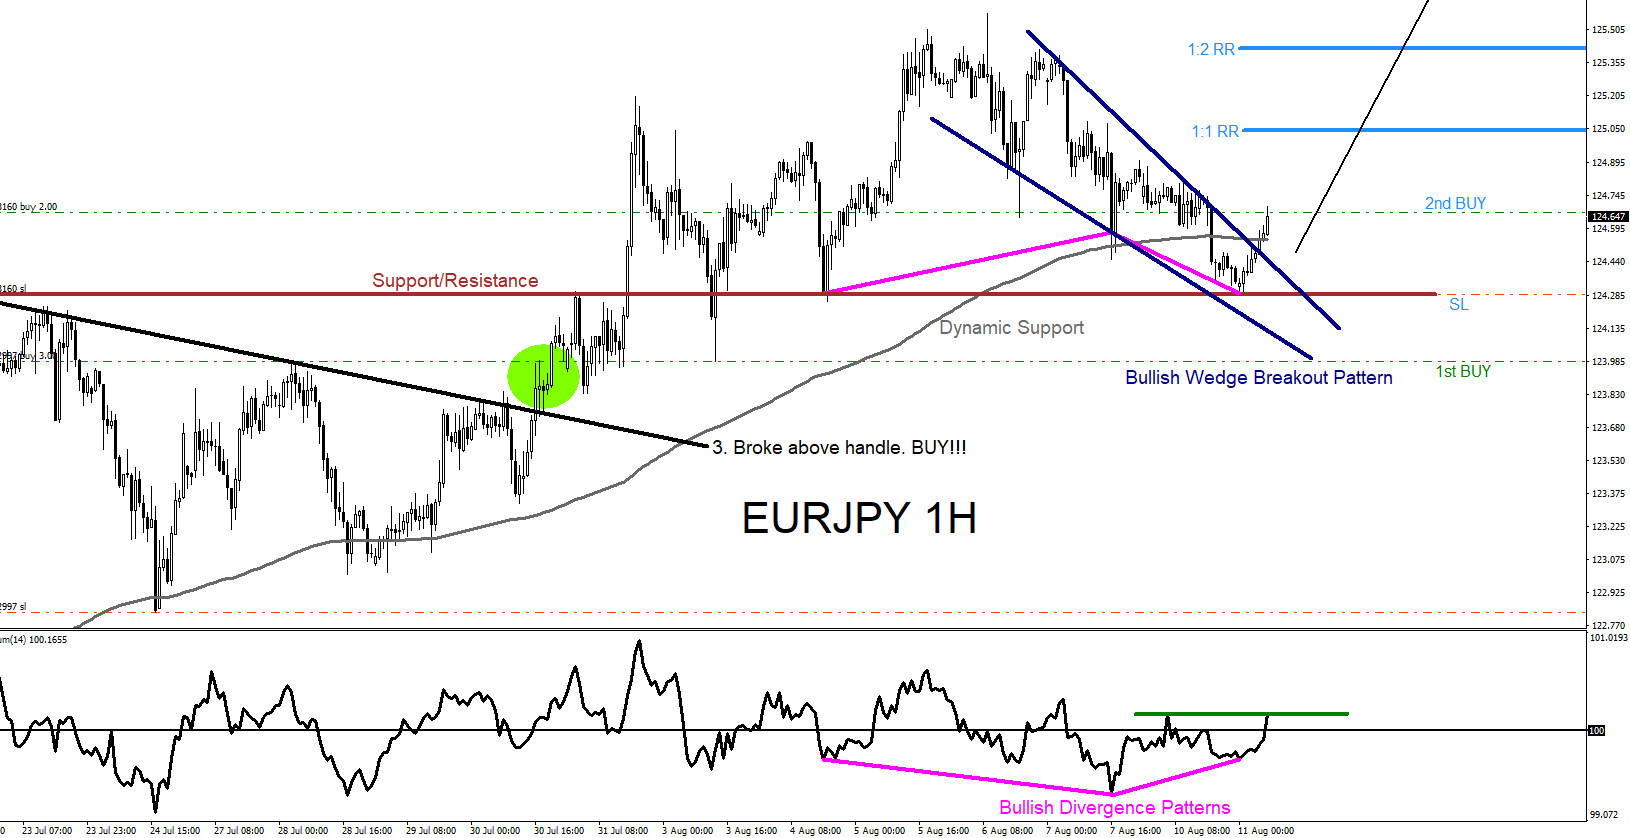 EURJPY : Visible Market Patterns Signalling the Move Higher